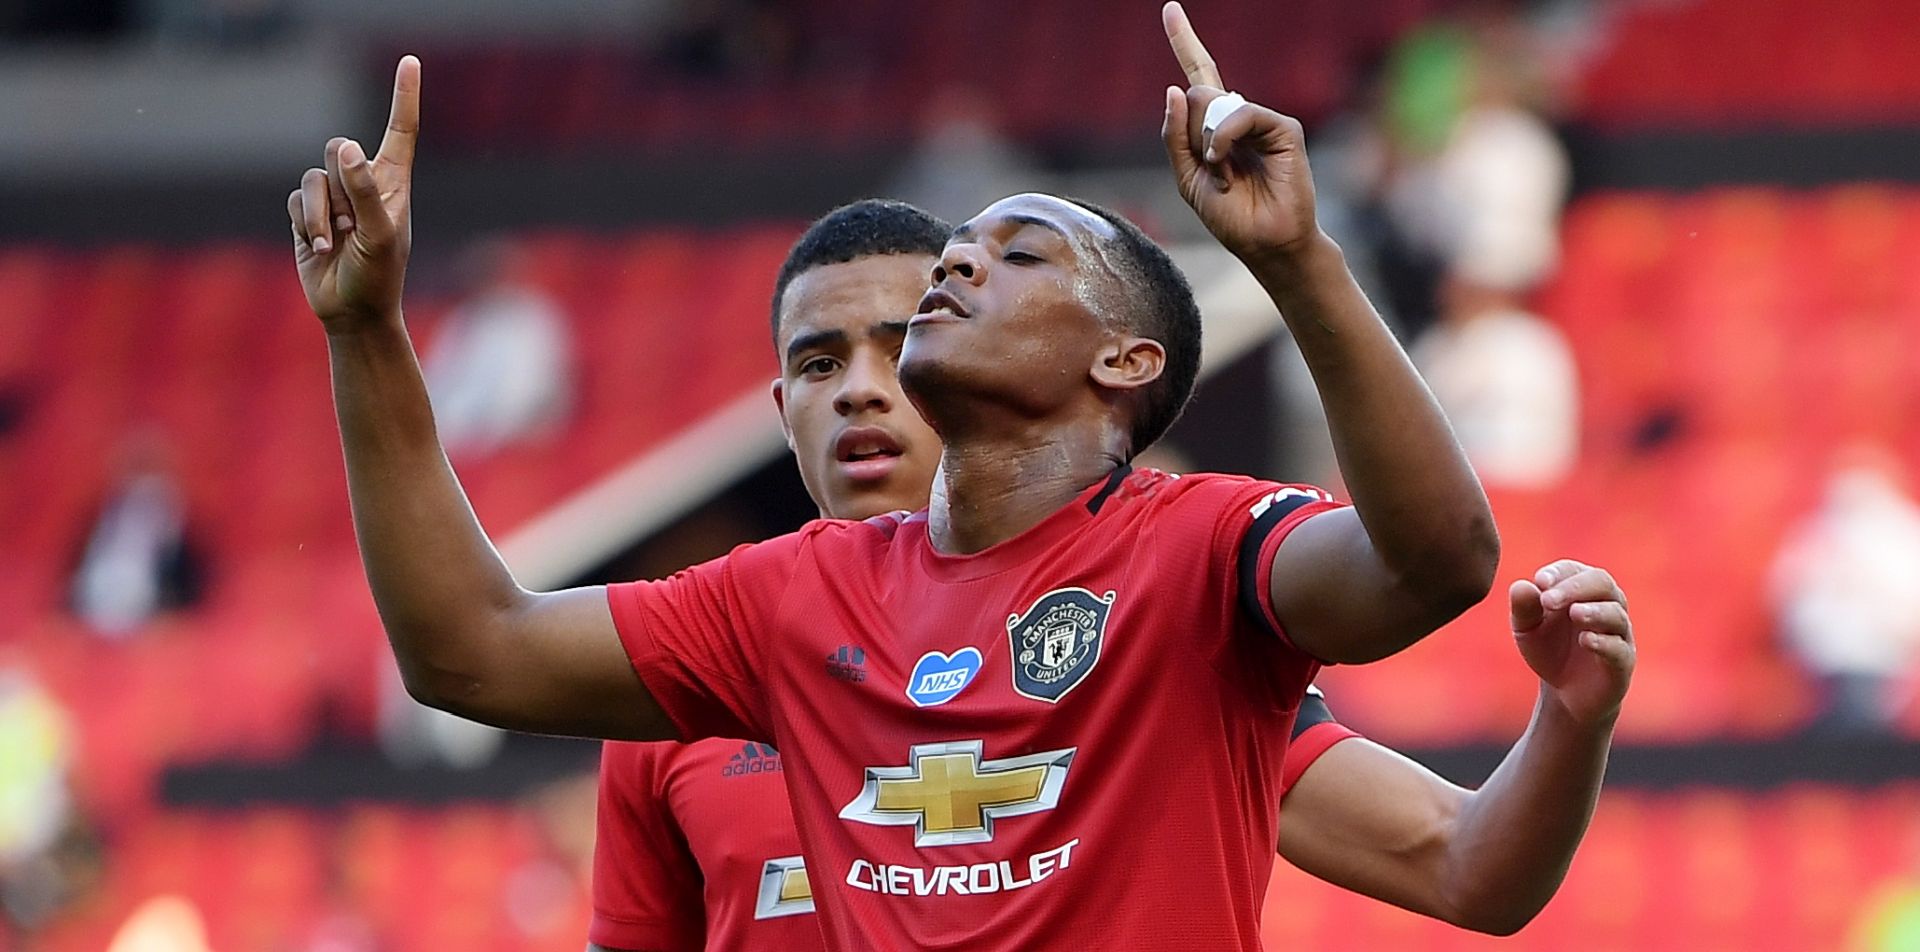 epa08506561 Anthony Martial (R) of Manchester United celebrates with teammate Mason Greenwood after scoring the 2-0 during the English Premier League match between Manchester United and Sheffield United in Manchester, Britain, 24 June 2020.  EPA/Michael Regan/NMC/Pool EDITORIAL USE ONLY. No use with unauthorized audio, video, data, fixture lists, club/league logos or 'live' services. Online in-match use limited to 120 images, no video emulation. No use in betting, games or single club/league/player publications.